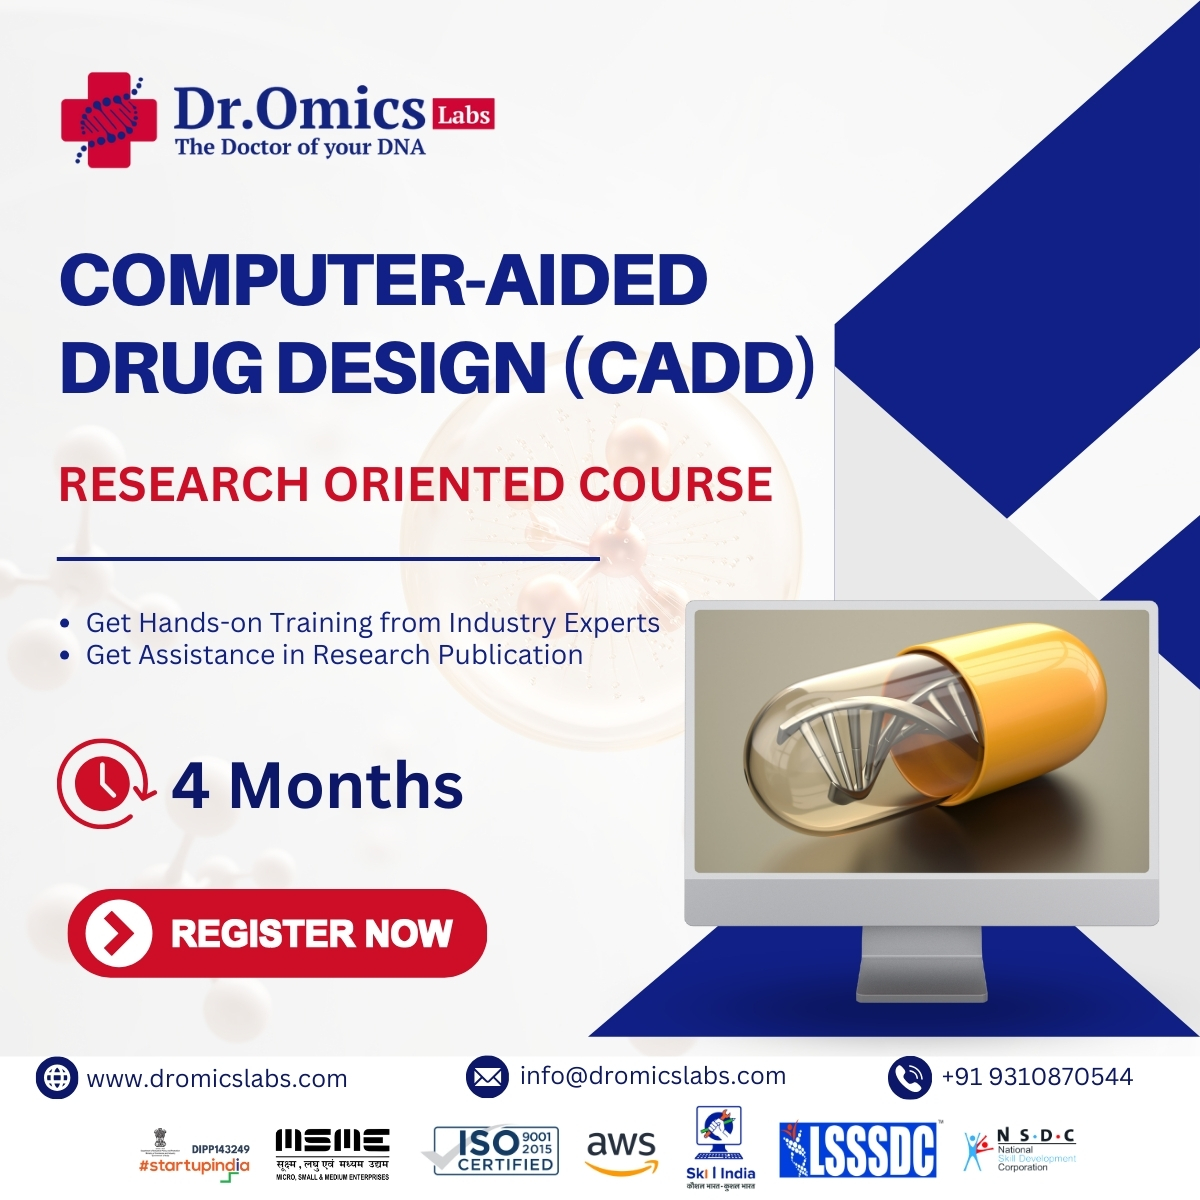 CADD RESEARCH ORIENTED COURSE